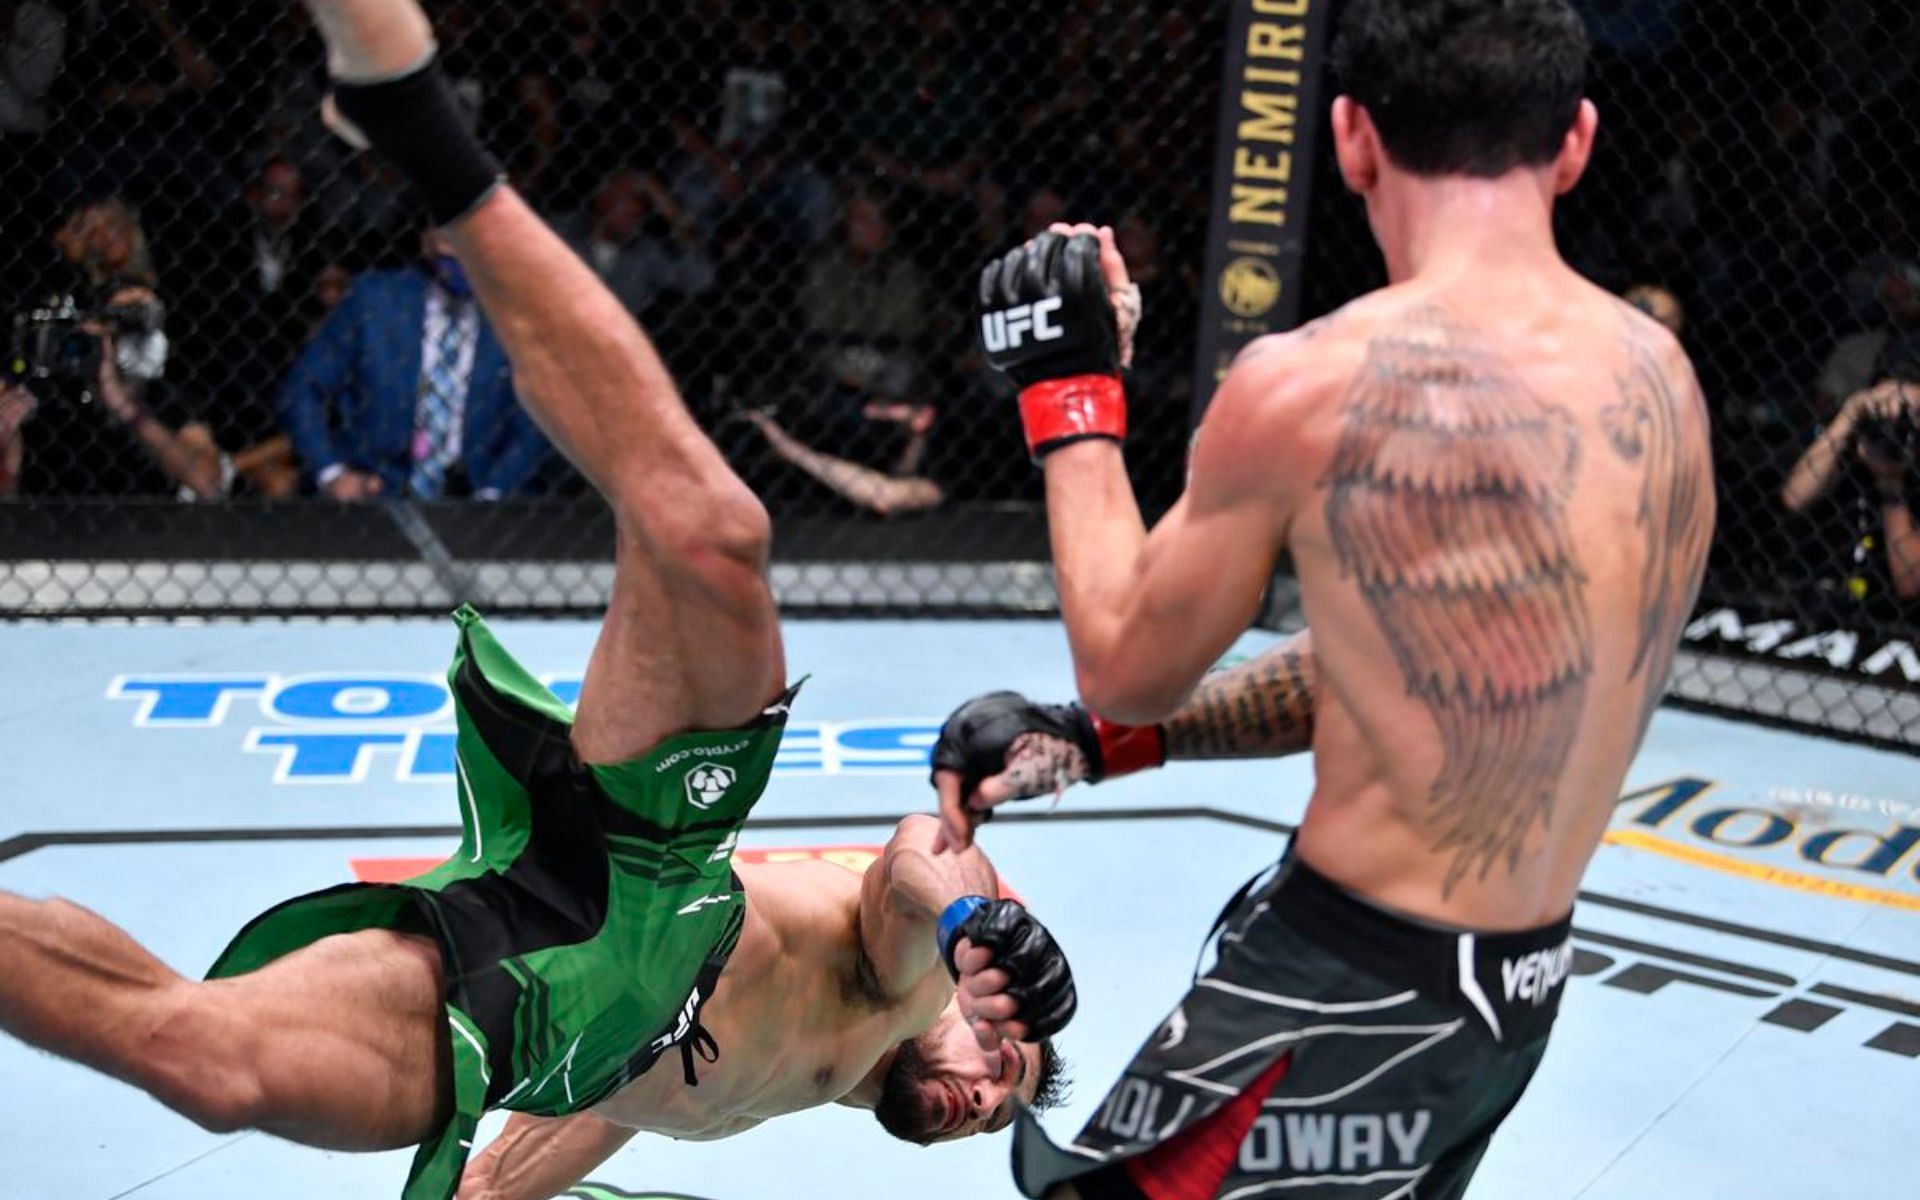 UFC Fight Night: Holloway vs. Rodriguez was crammed with wild and explosive moments